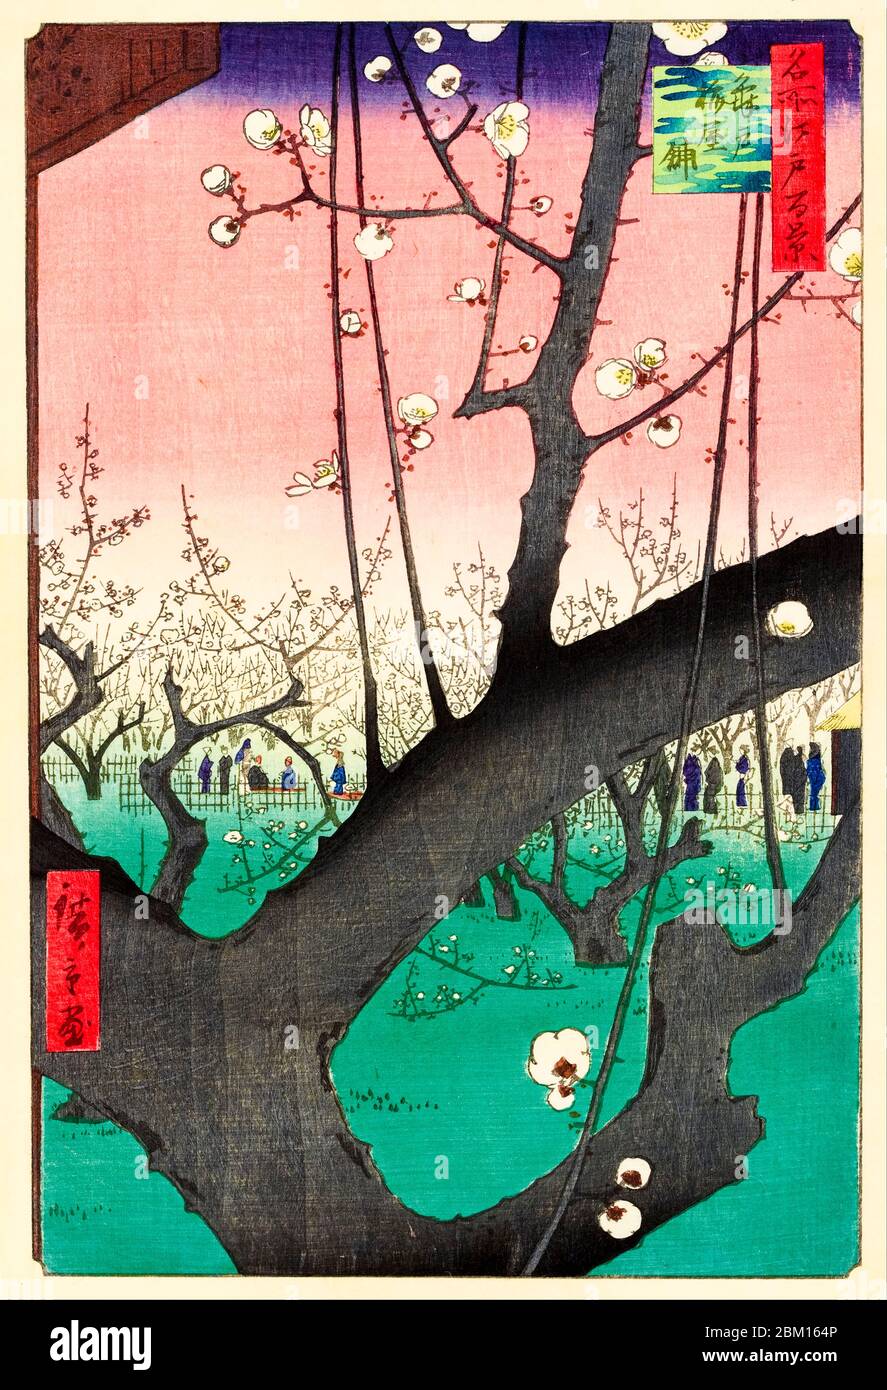 Utagawa Hiroshige, woodblock print, Plum Park in Kameido, from the series One Hundred Famous Views of Edo, 1857 Stock Photo